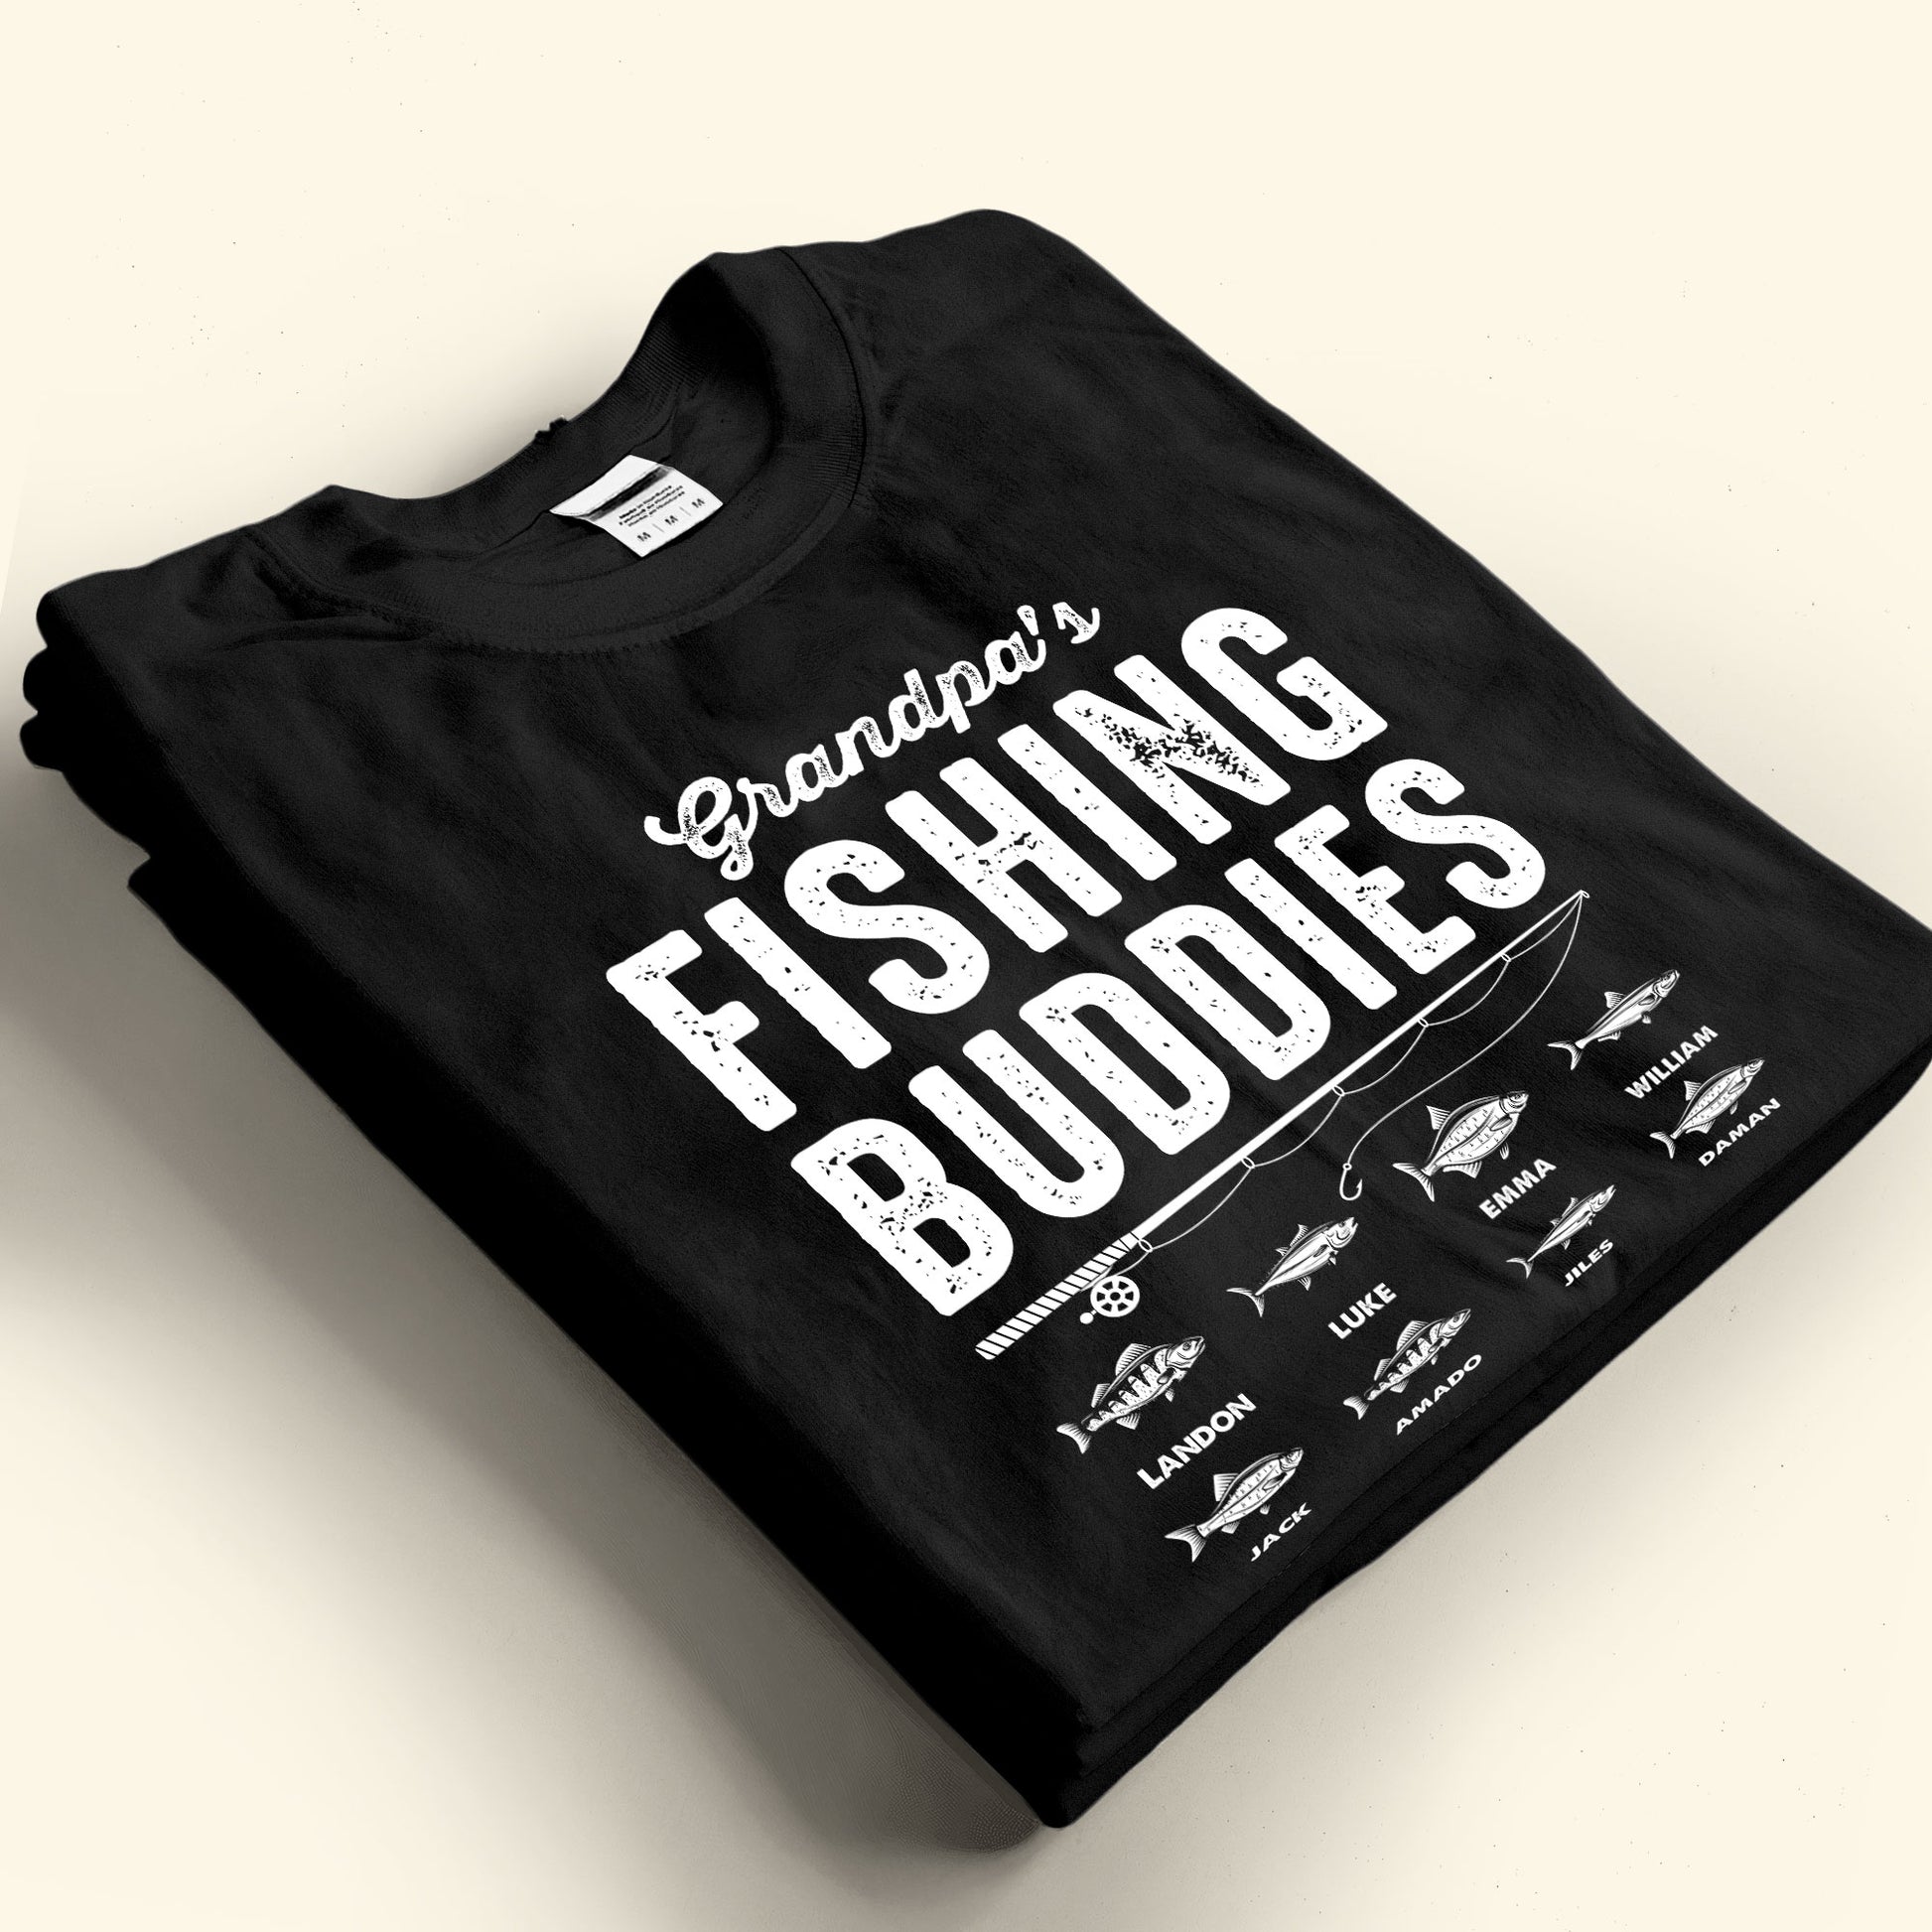 Fishing Buddies Gift for Grandpa Dad Father's Day Birthday Gift - Personalized Shirt